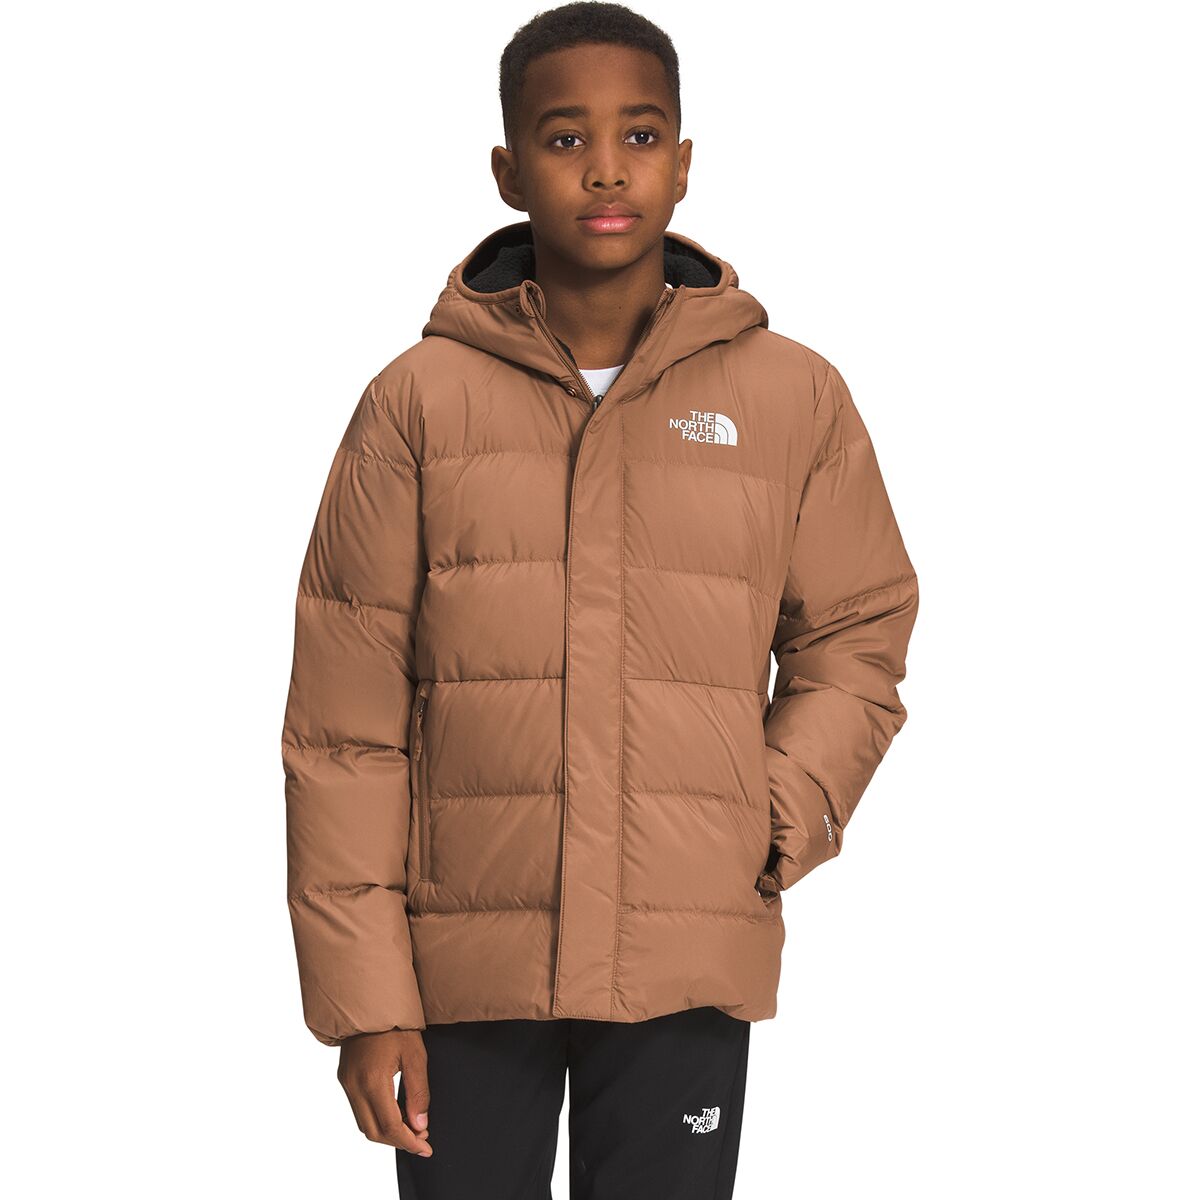 The North Face North Down Fleece-Lined Parka - Boys'